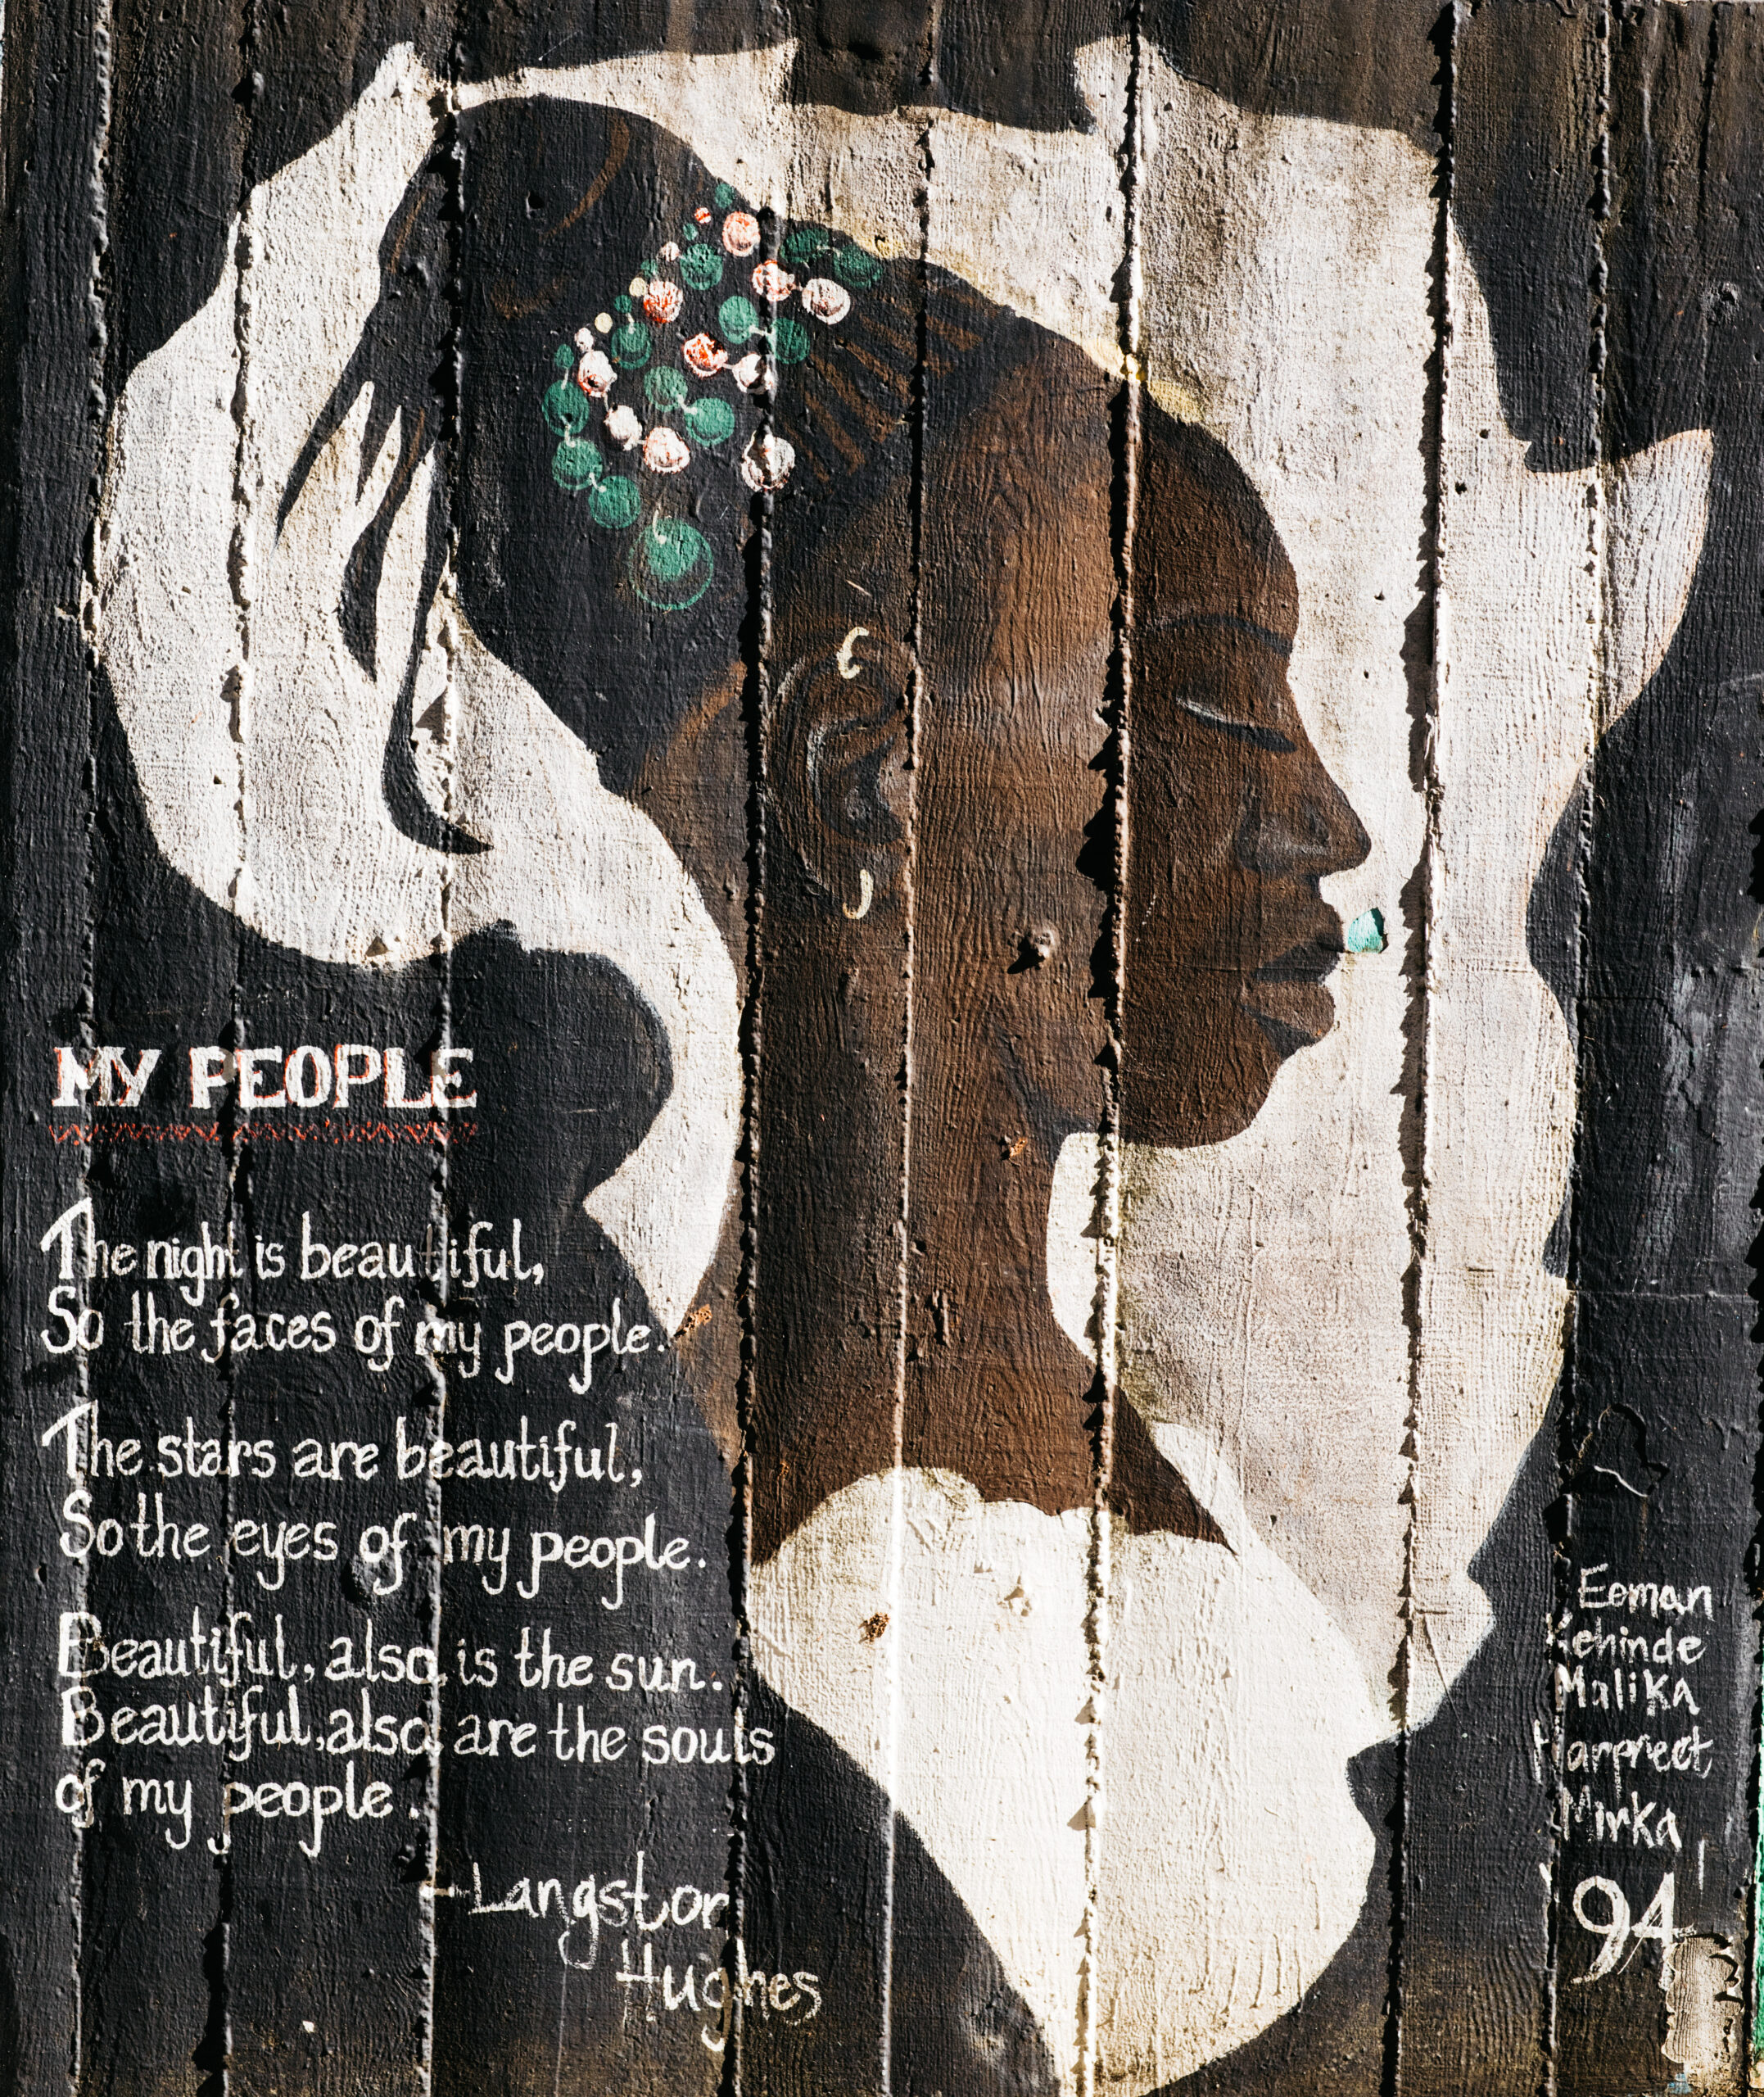 mural of a woman